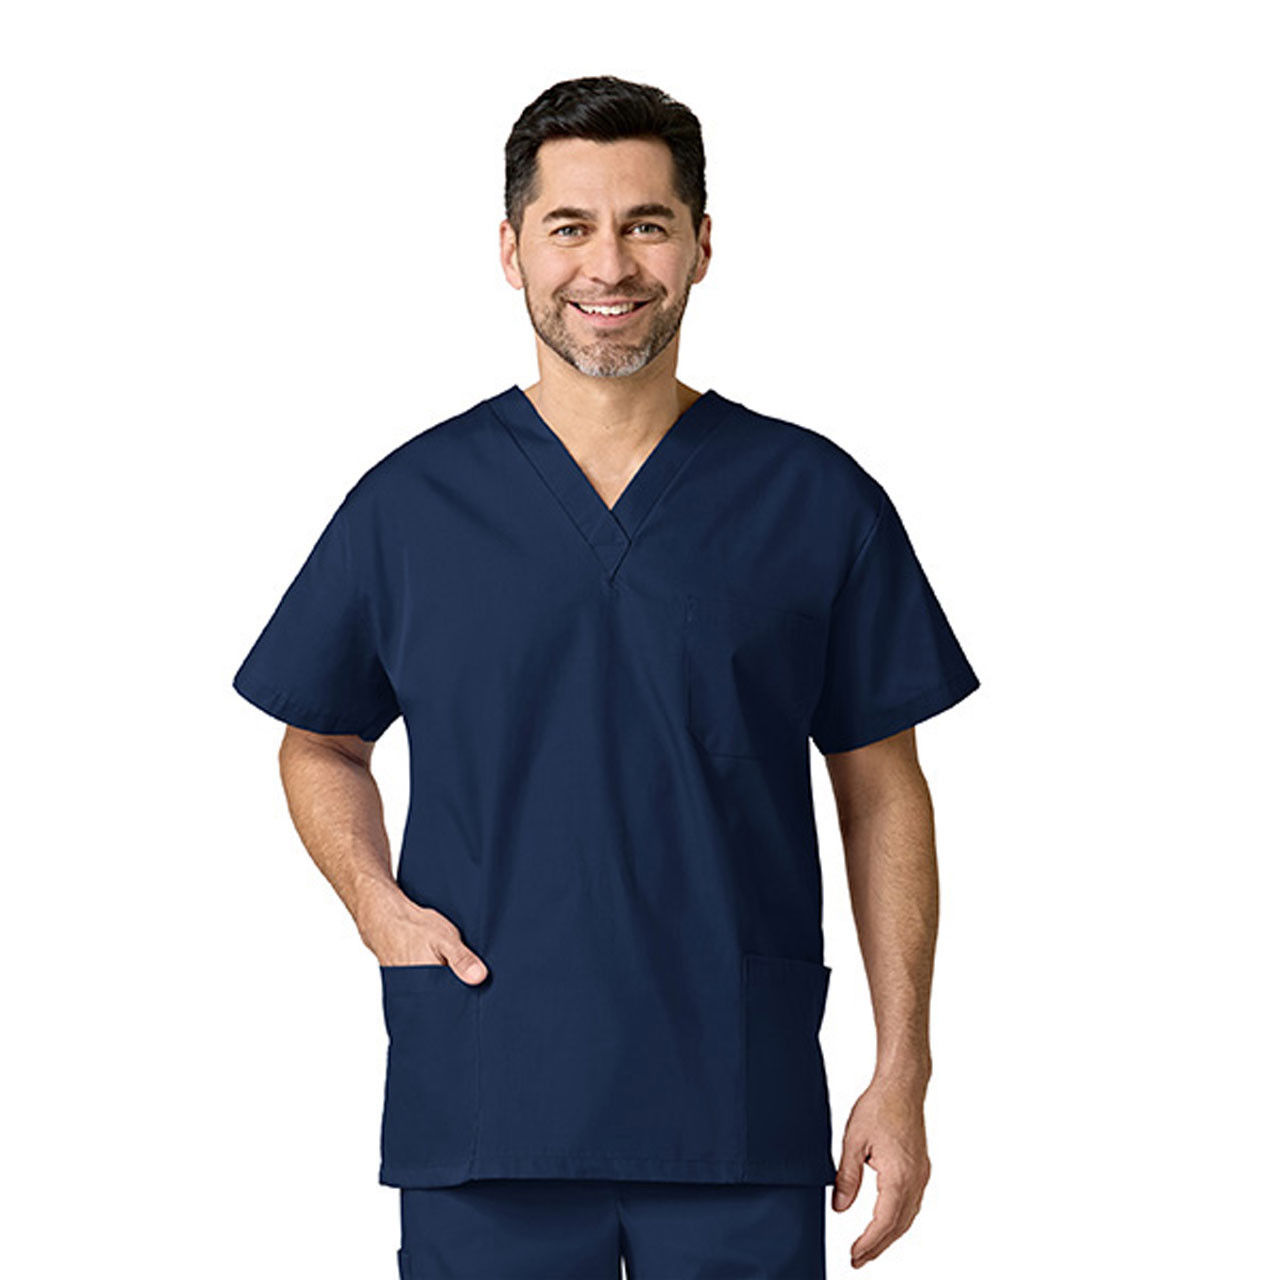 Is this navy blue scrub top durable?